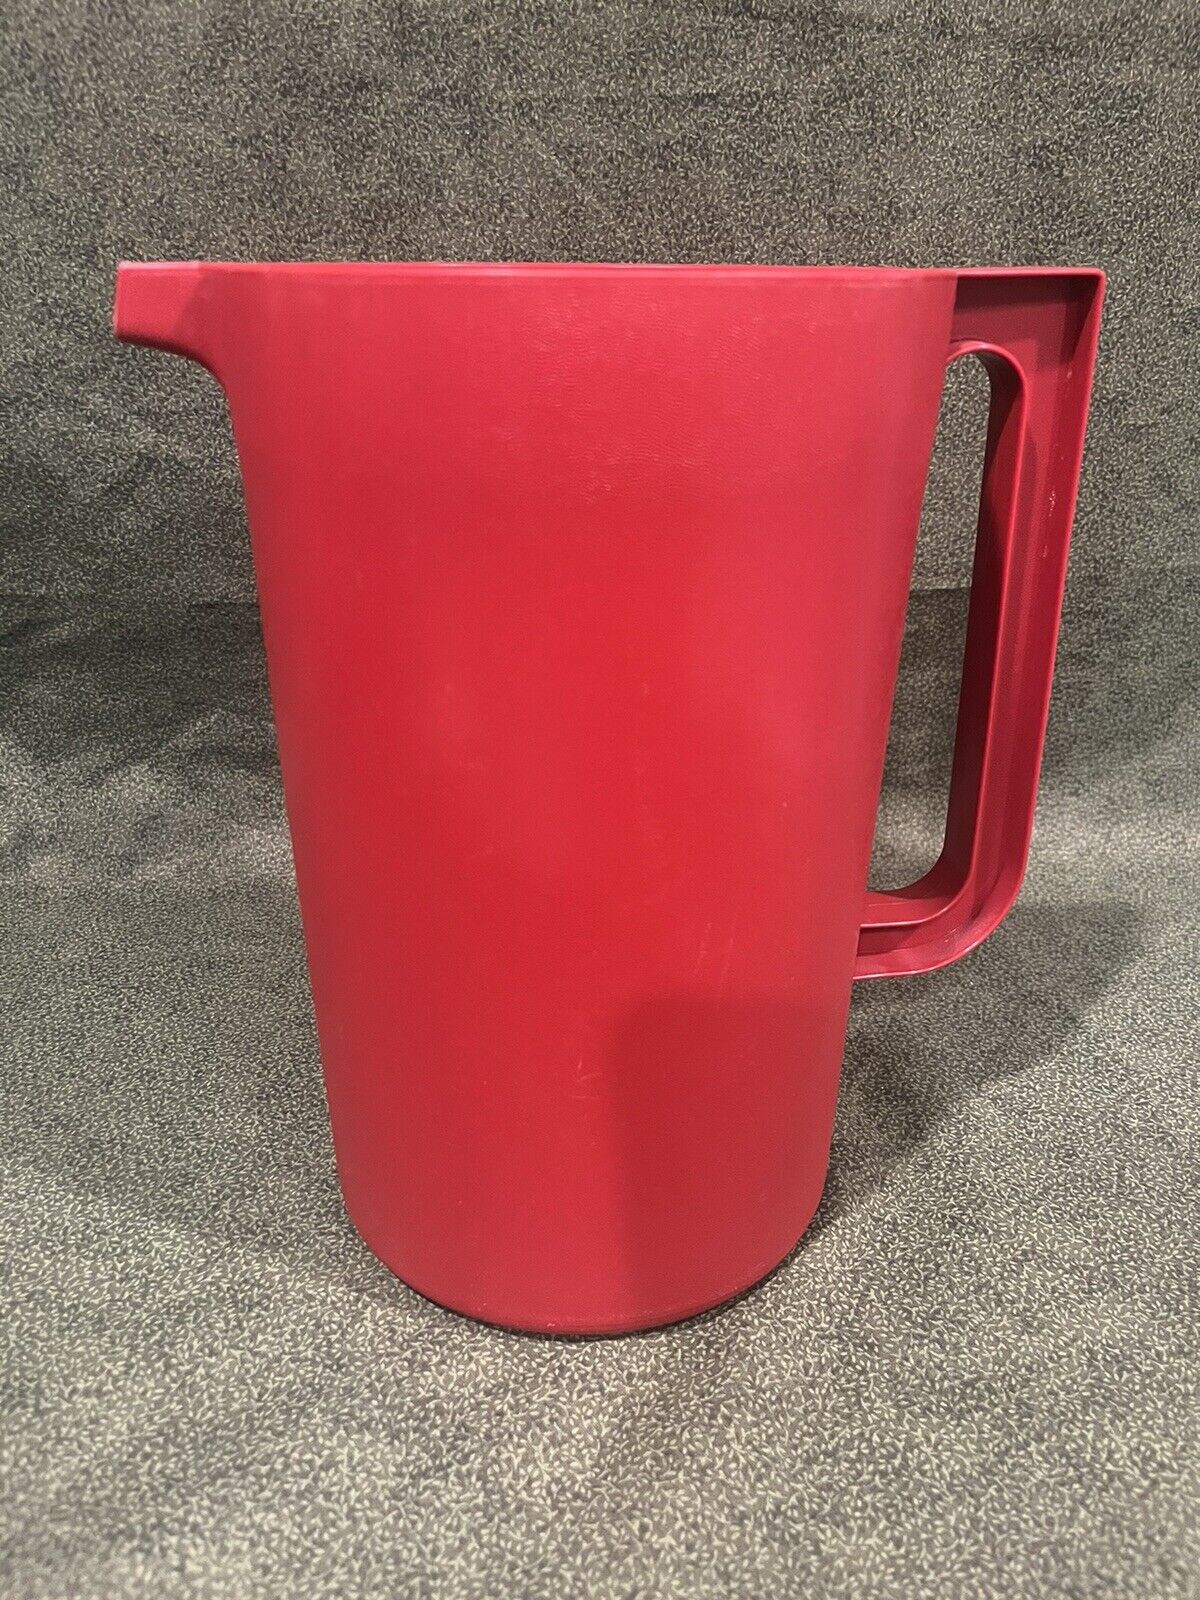 Vintage Tupperware Red Gallon Pitcher  1416-4 *no Lid*